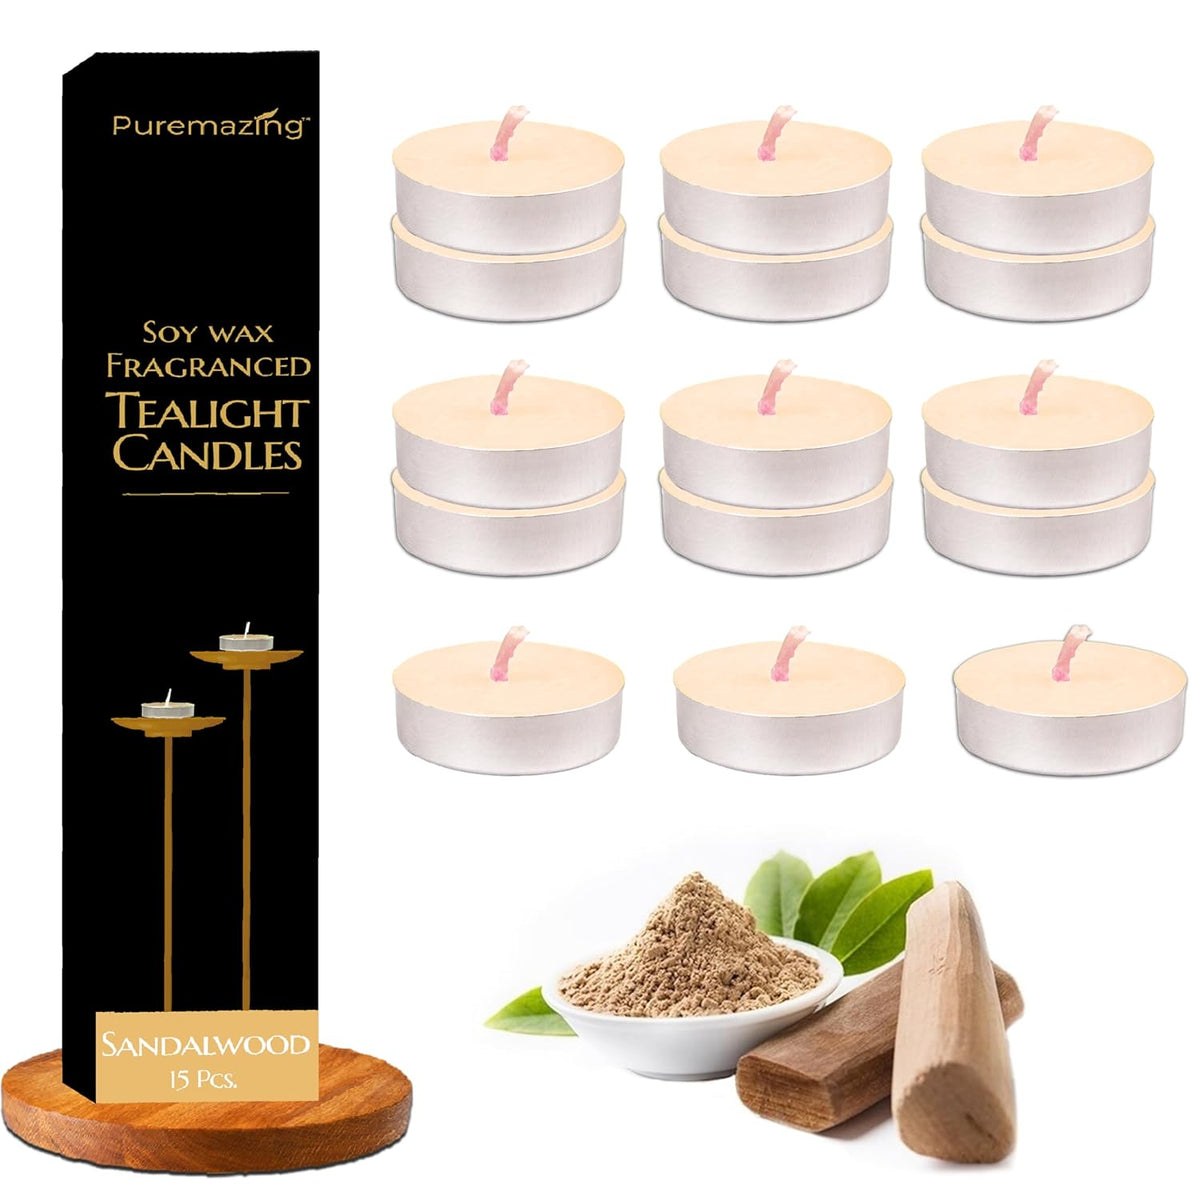 Puremazing Scented Soy Wax Tealight Candles